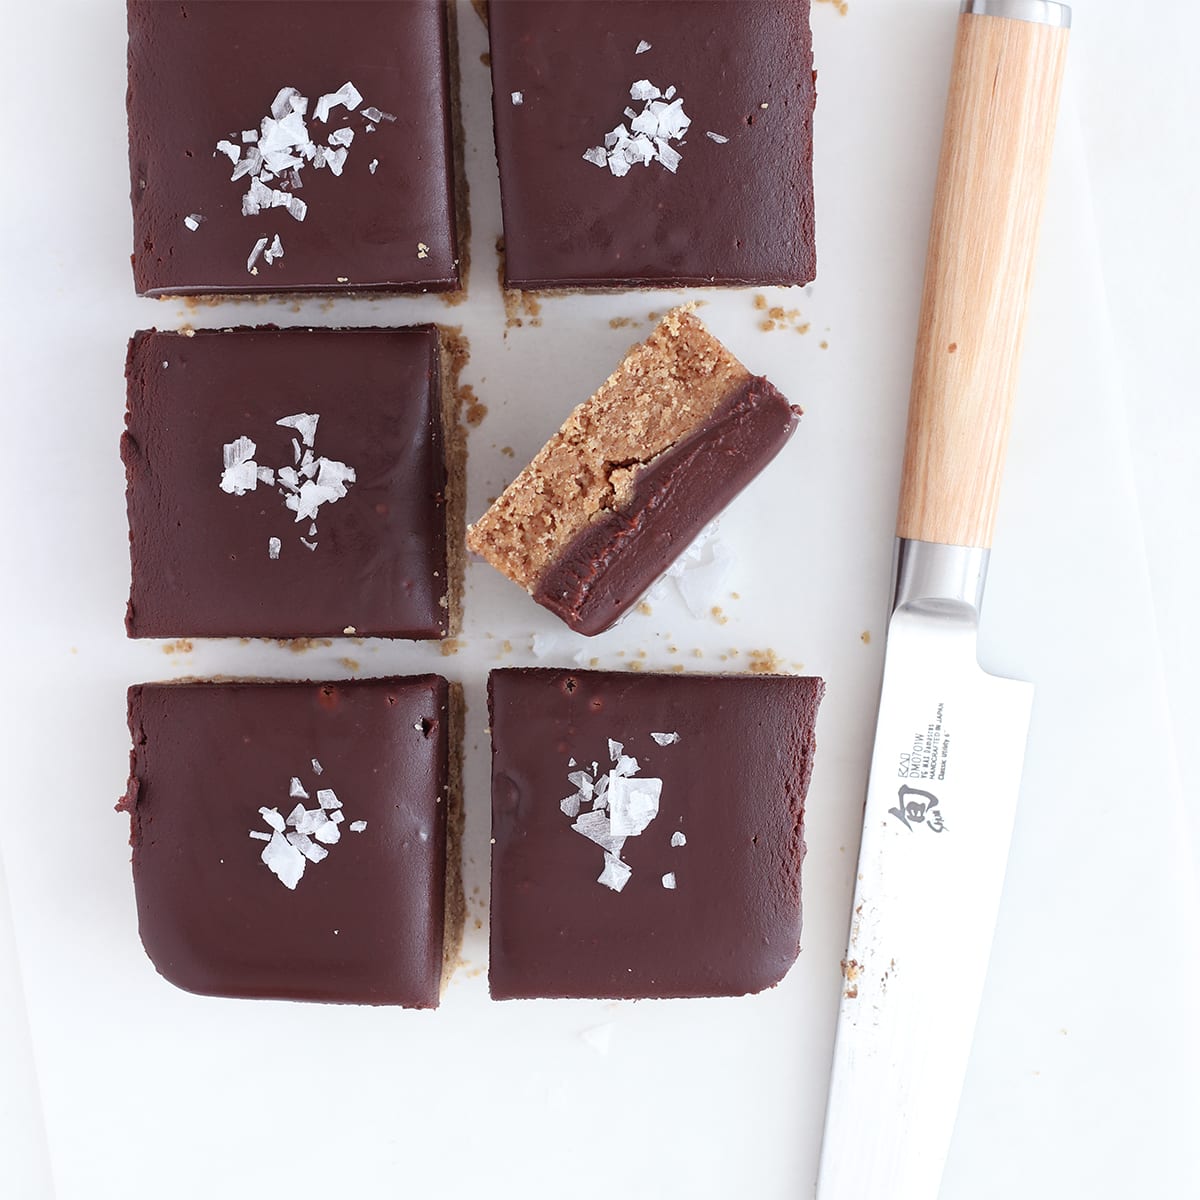 peanut butter protein bars cut with a knife.